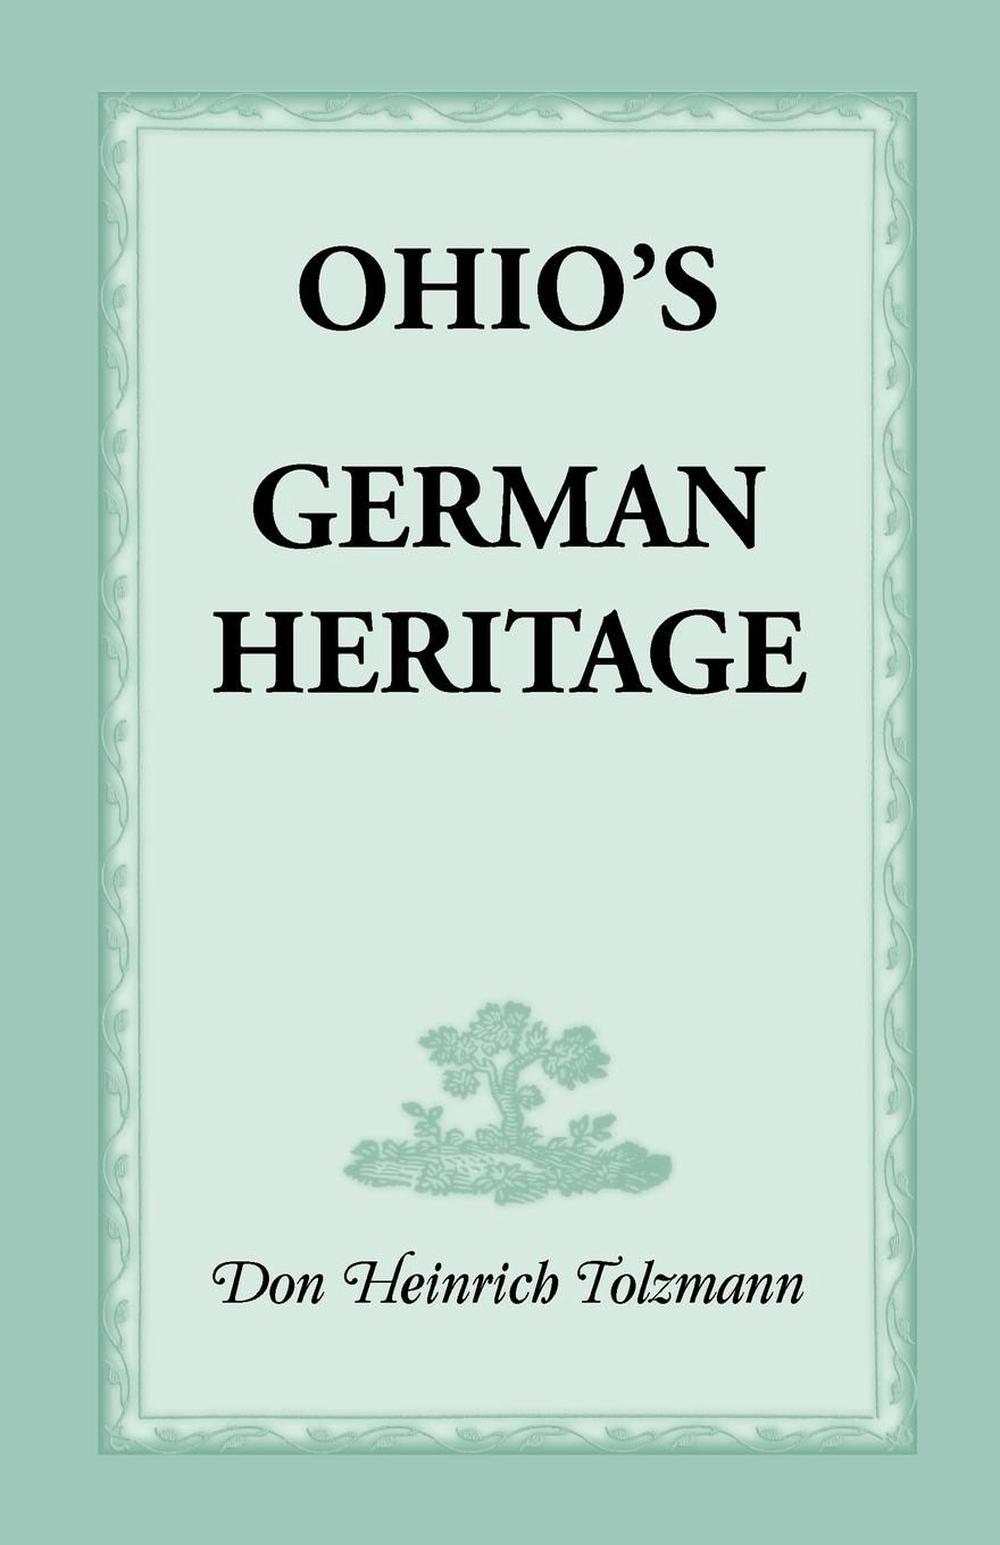 The German-American Experience by Don Heinrich Tolzmann